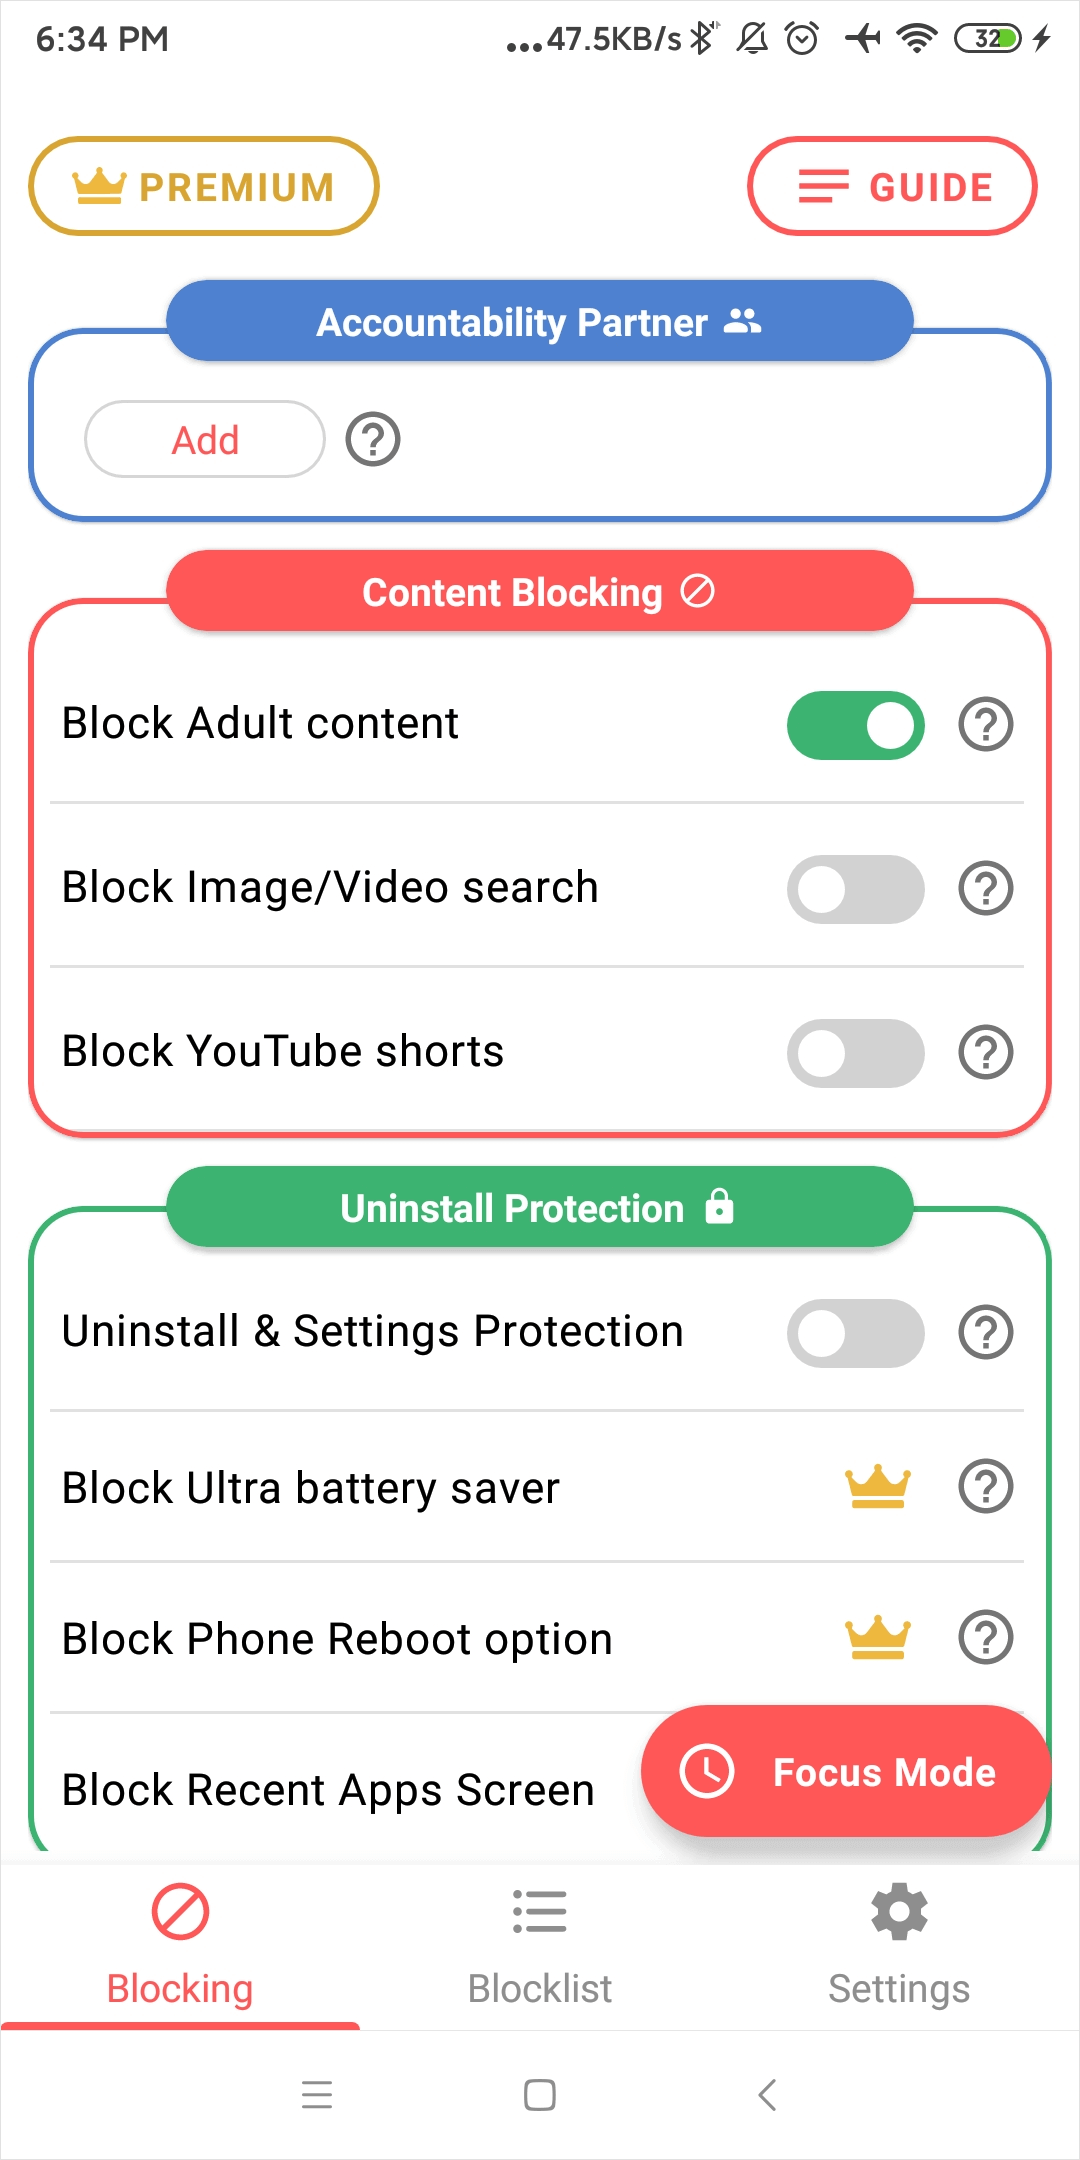 the Blocking tab showing that the Block Adult content option is turned on